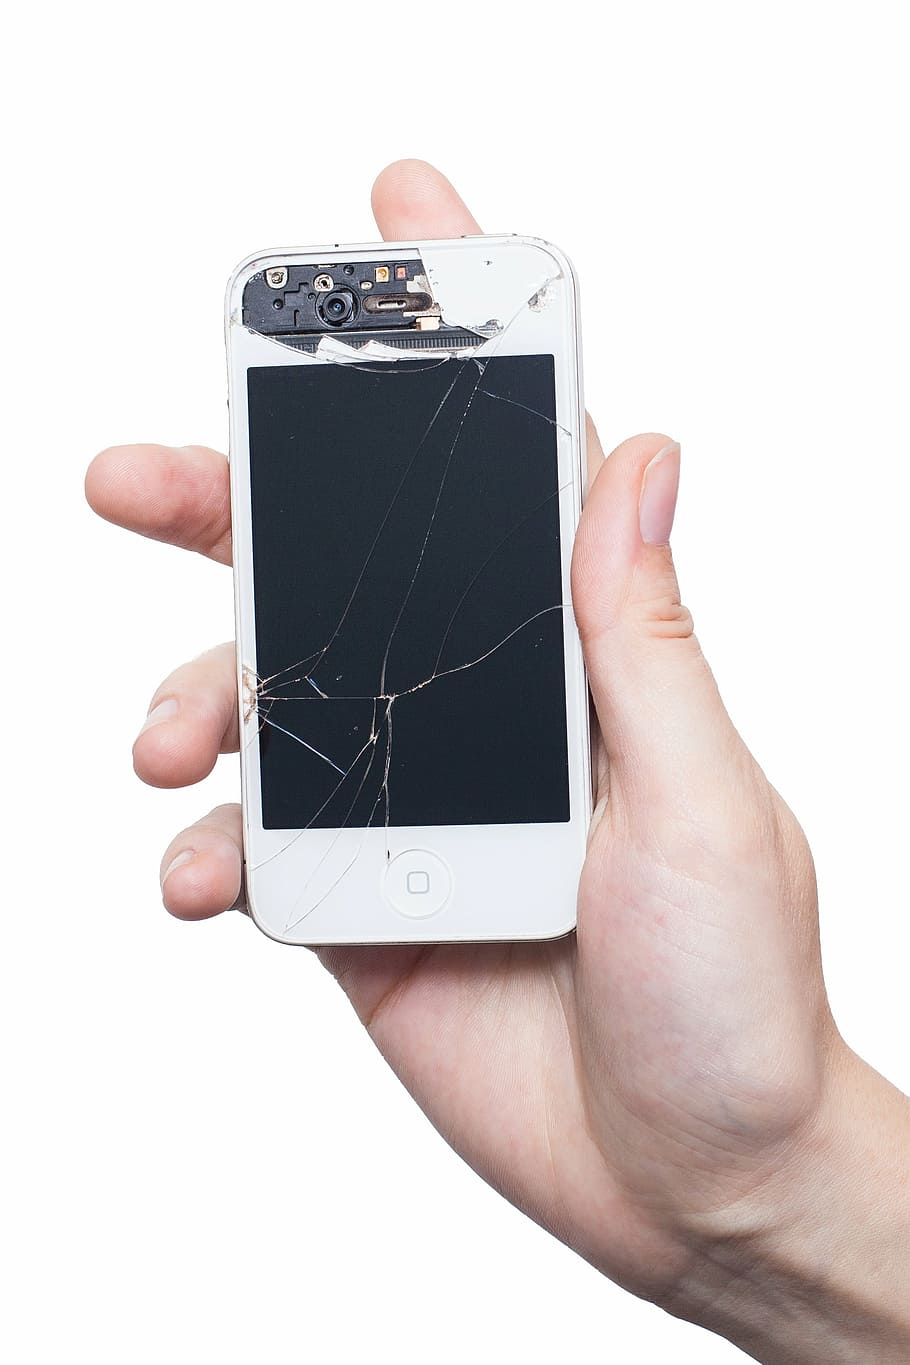 iphone, mobile phone, smartphone, display, broken, display damage, apple, touch screen, ad, technology